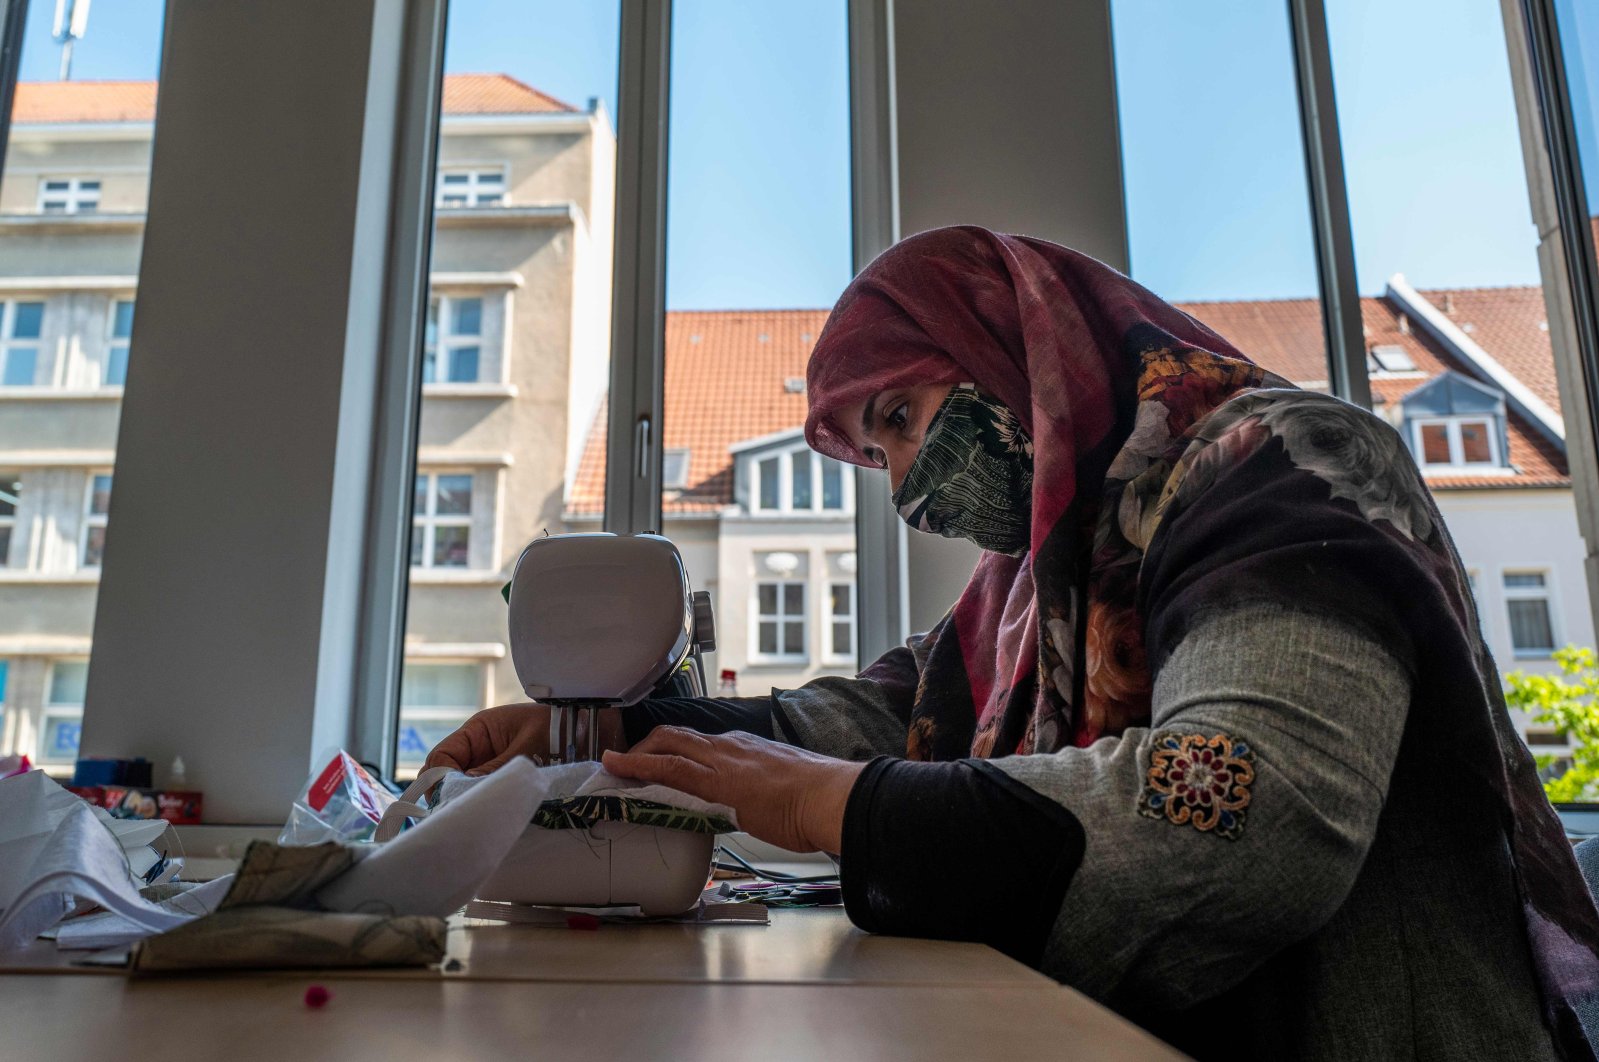 A refugee from Afghanistan sews face covers  amid the COVID-19 pandemic in Berlin, Germany on April 23, 2020. (AFP Photo)